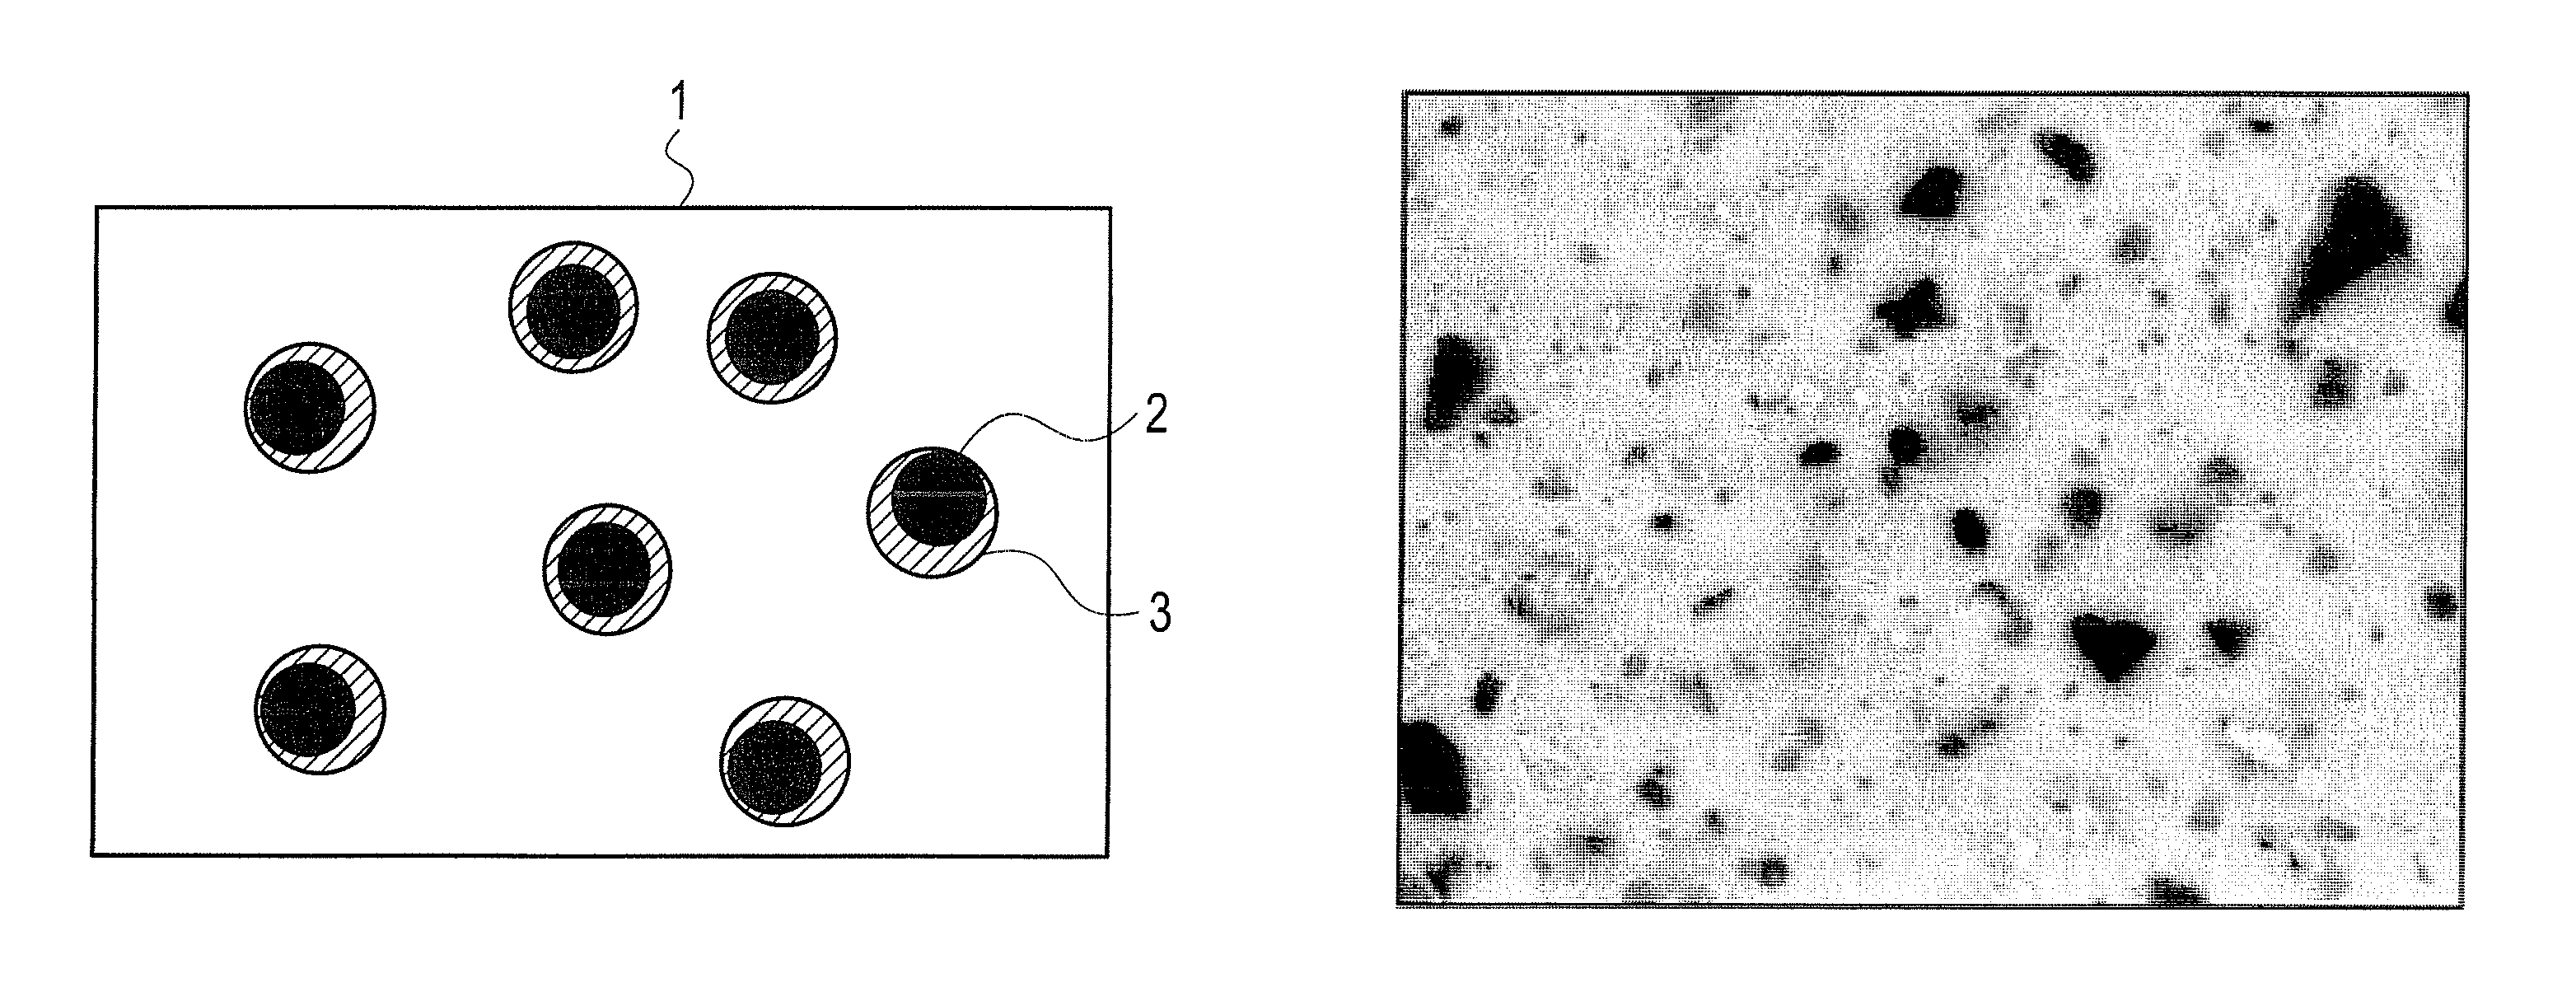 Yttrium oxide-containing material, component of semiconductor manufacturing equipment, and method of producing yttrium oxide-containing material